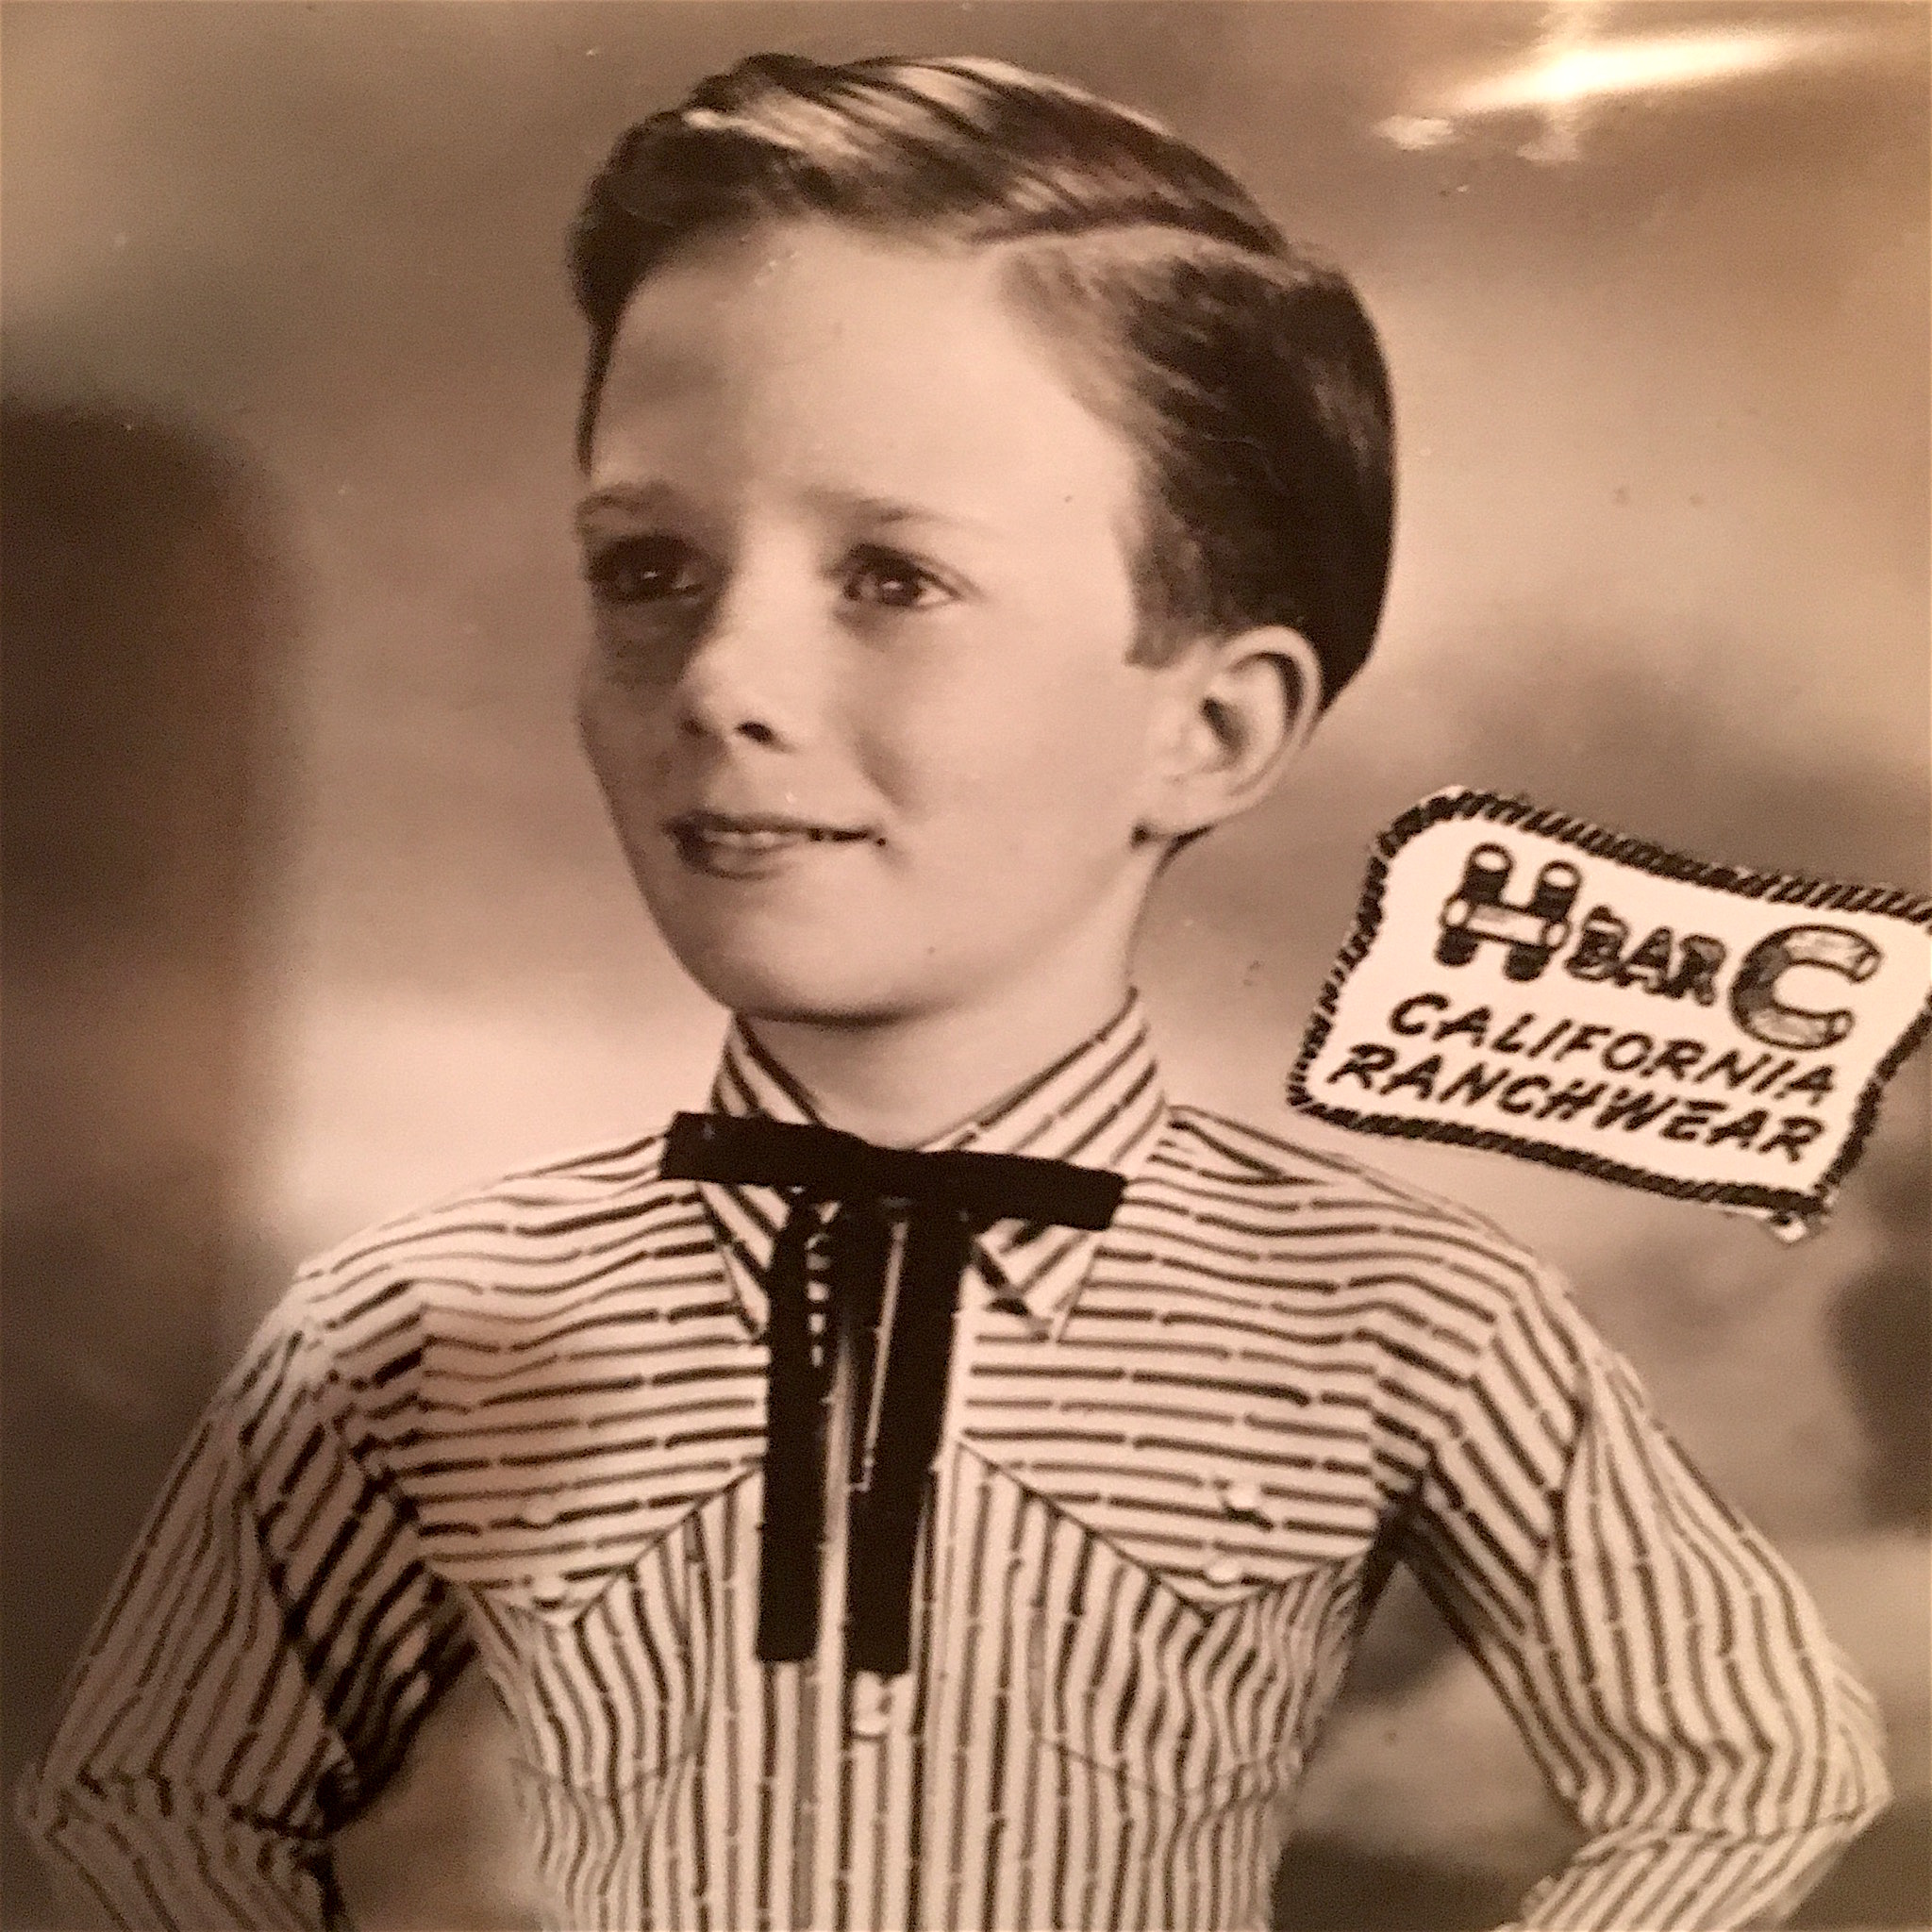 Child modeling in an H-Bar-C California Ranchwear shirt with a black string tie